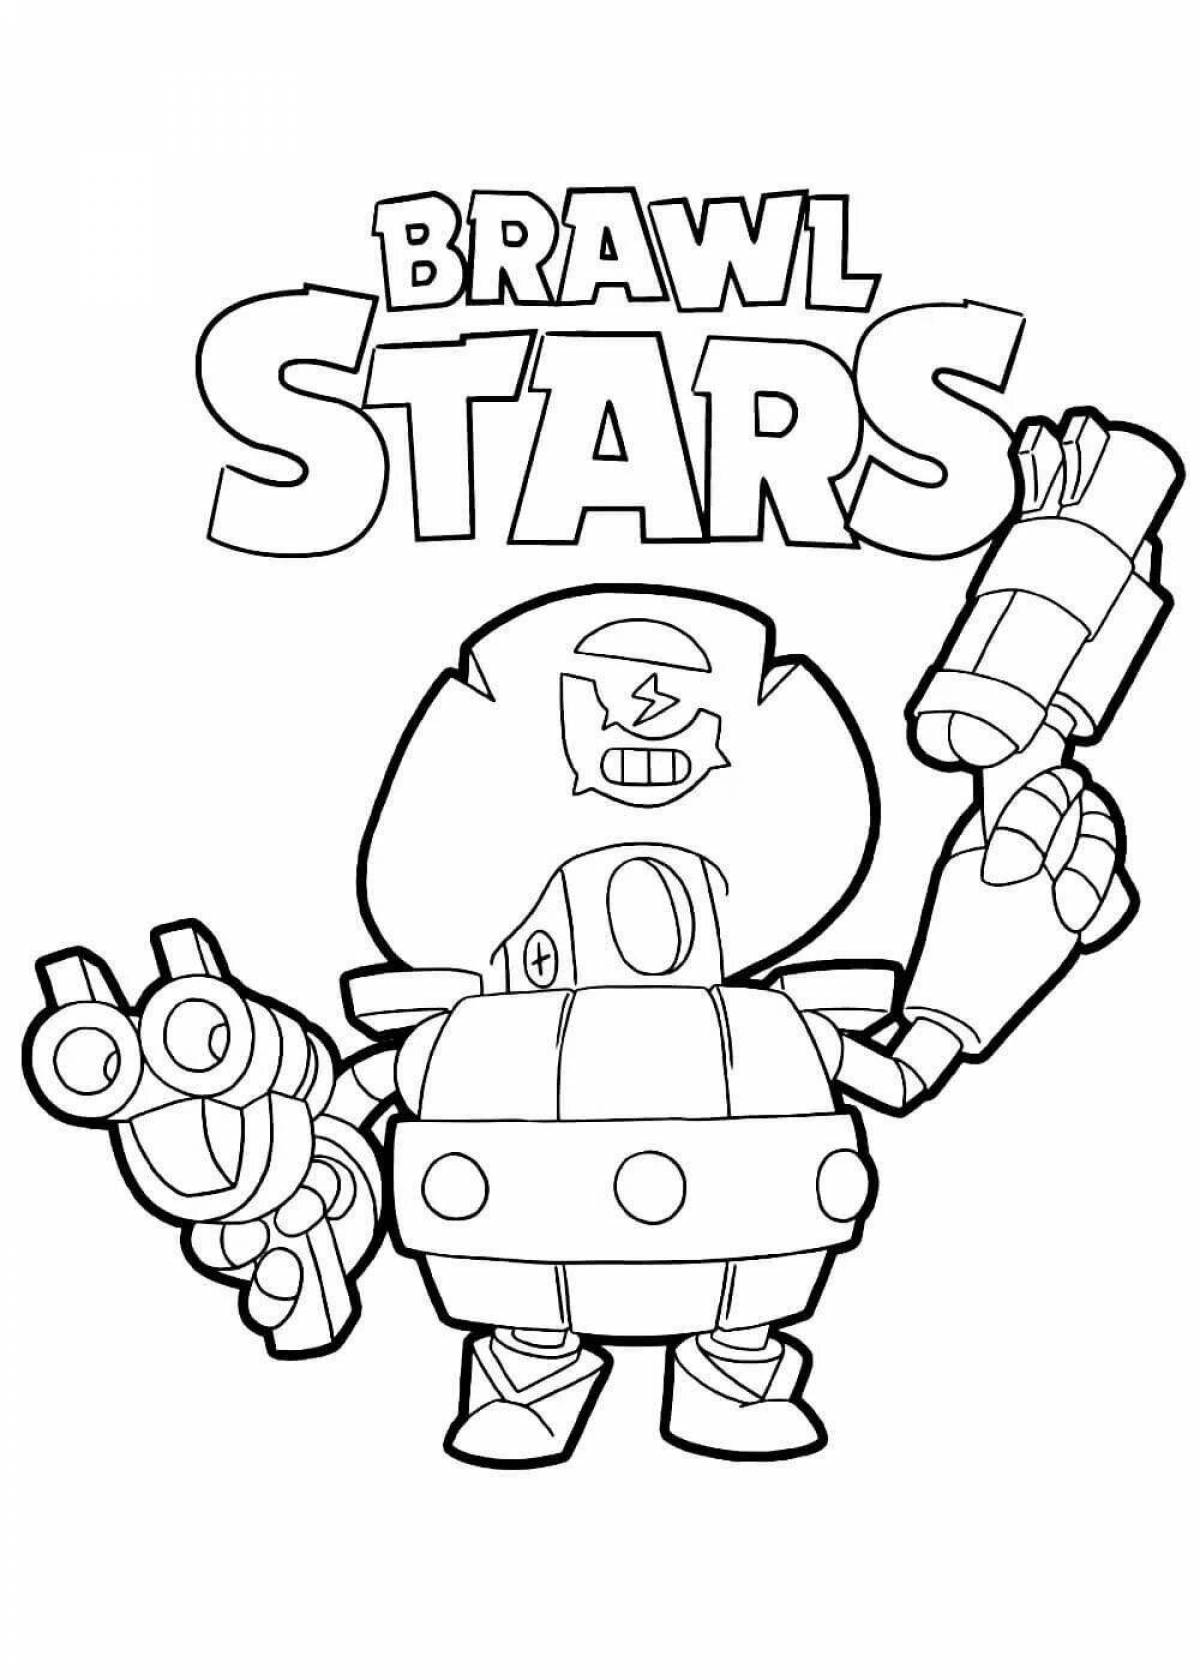 Coloring artistic bravo stars lettering page